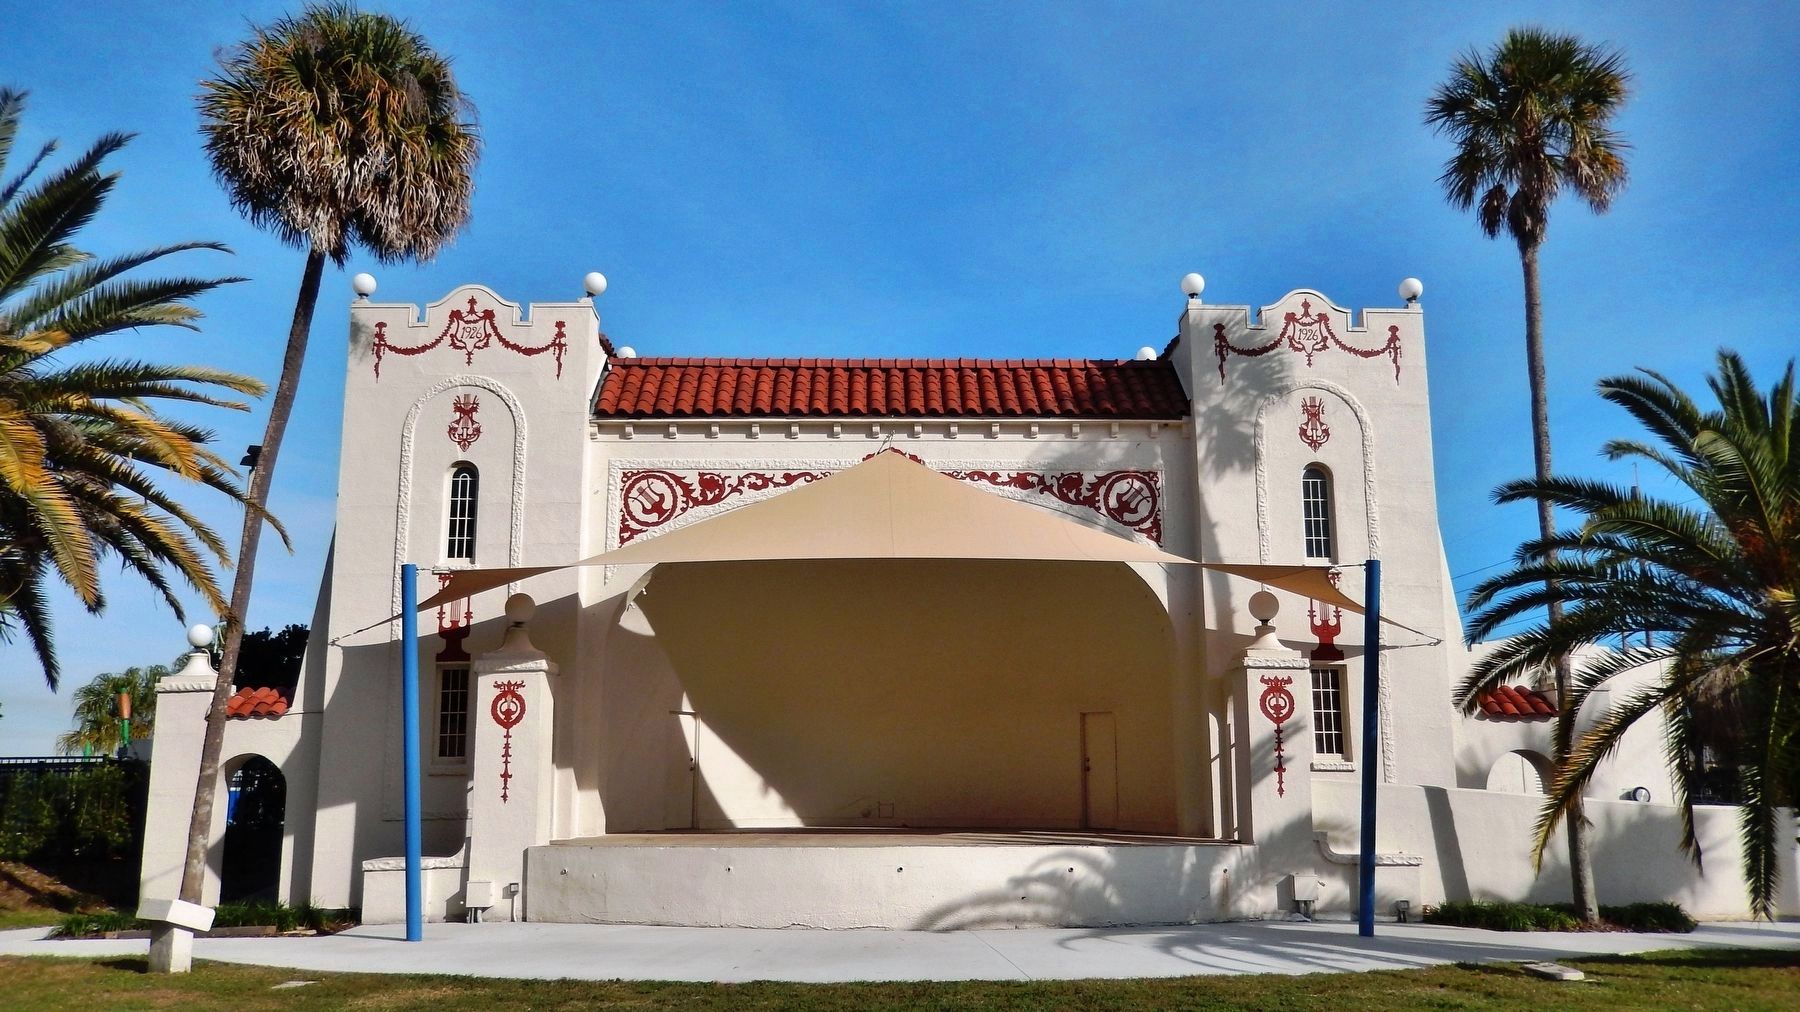 Alice B. McClelland Memorial Band Shell image. Click for full size.